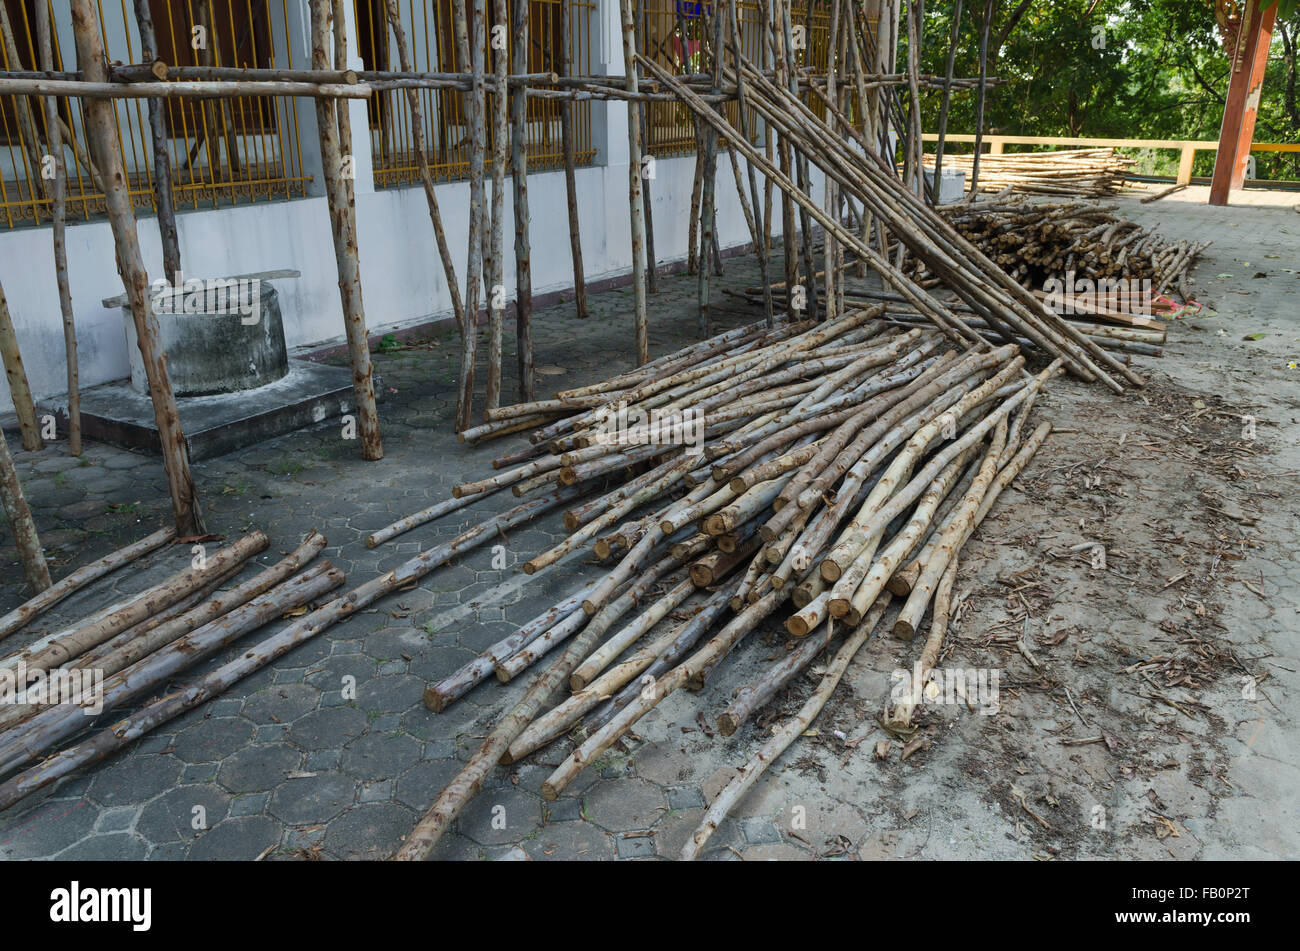 Pile of tree trunks, Lumber pile at construction site wasted wood material for recycling. Stock Photo